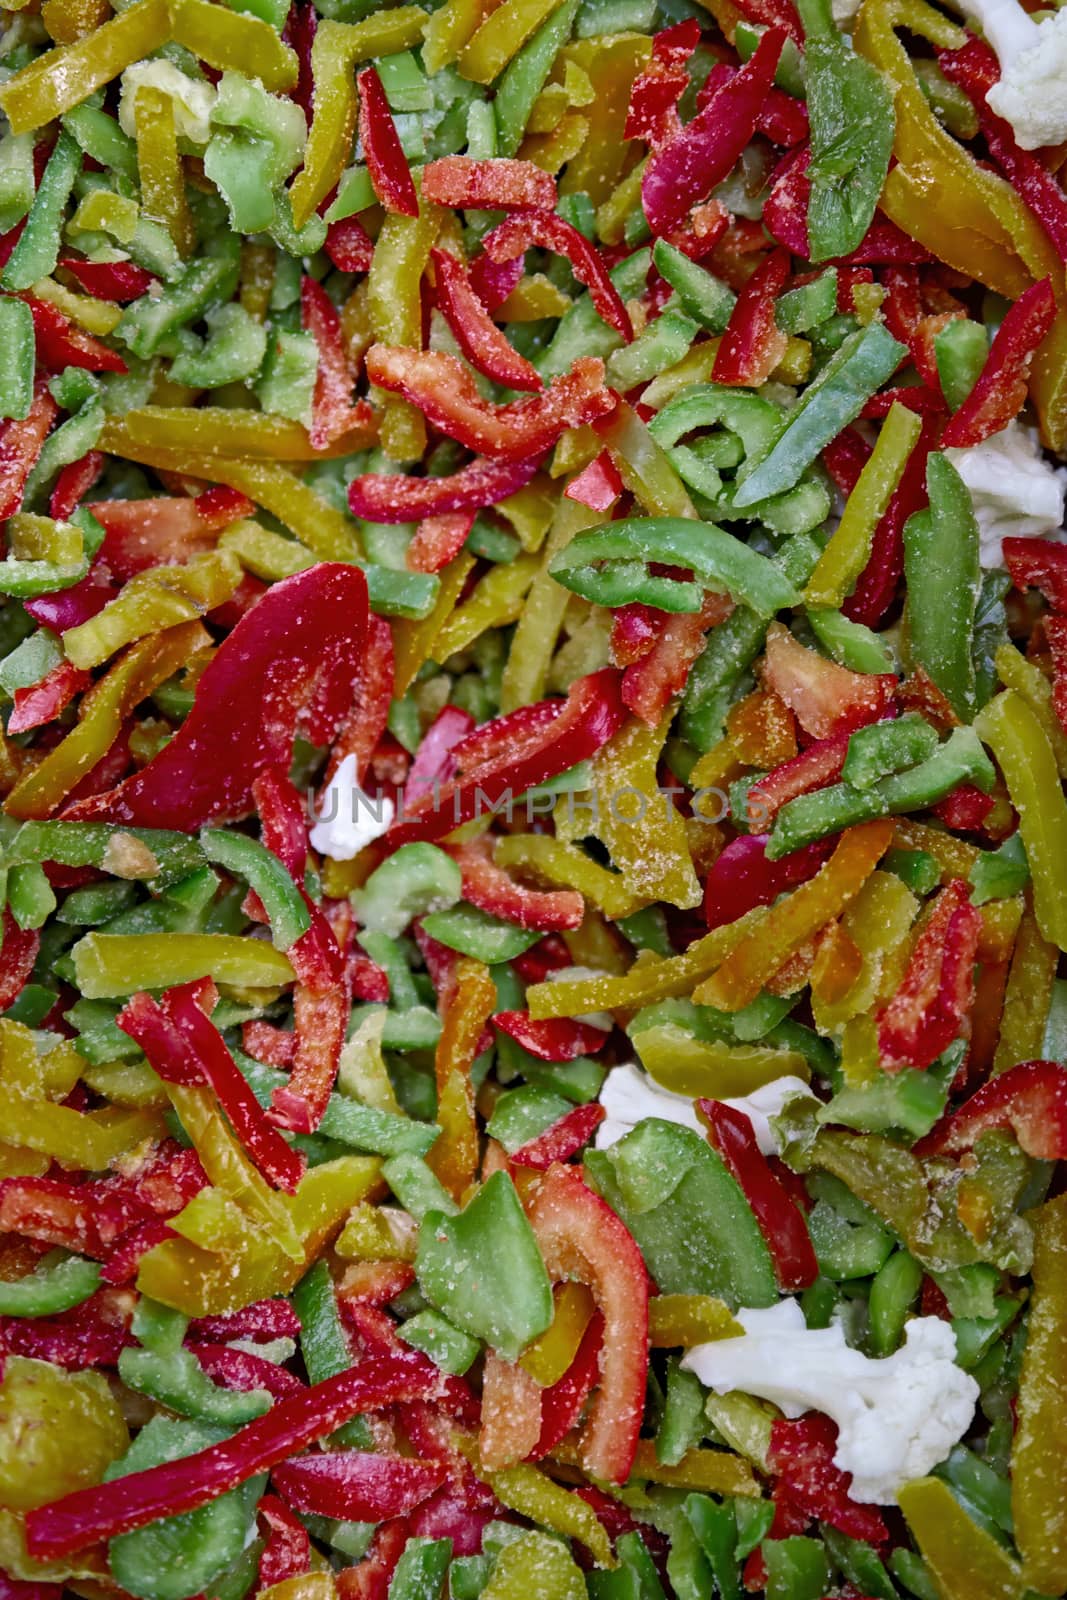 Brightly colored seasonal vegetables are frozen and sold at the grocery store. Natural products that are suitable for quick cooking healthy food.